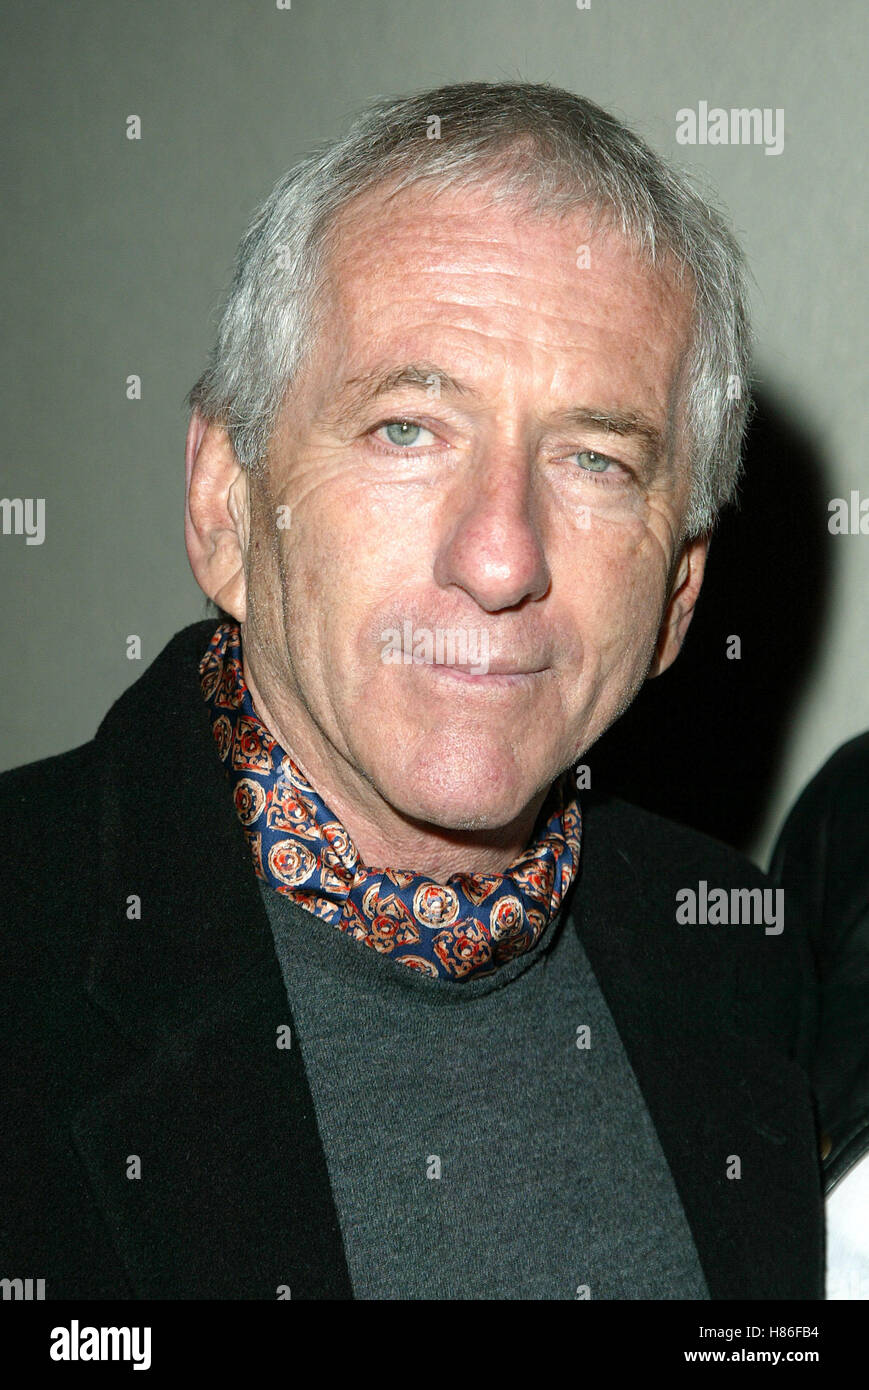 BARRY NEWMAN NORBY WALTERS HOLIDAY PARTY FRIARS CLUB BEVERLY HILLS LOS ANGELES US 24 November 2002 Stock Photo